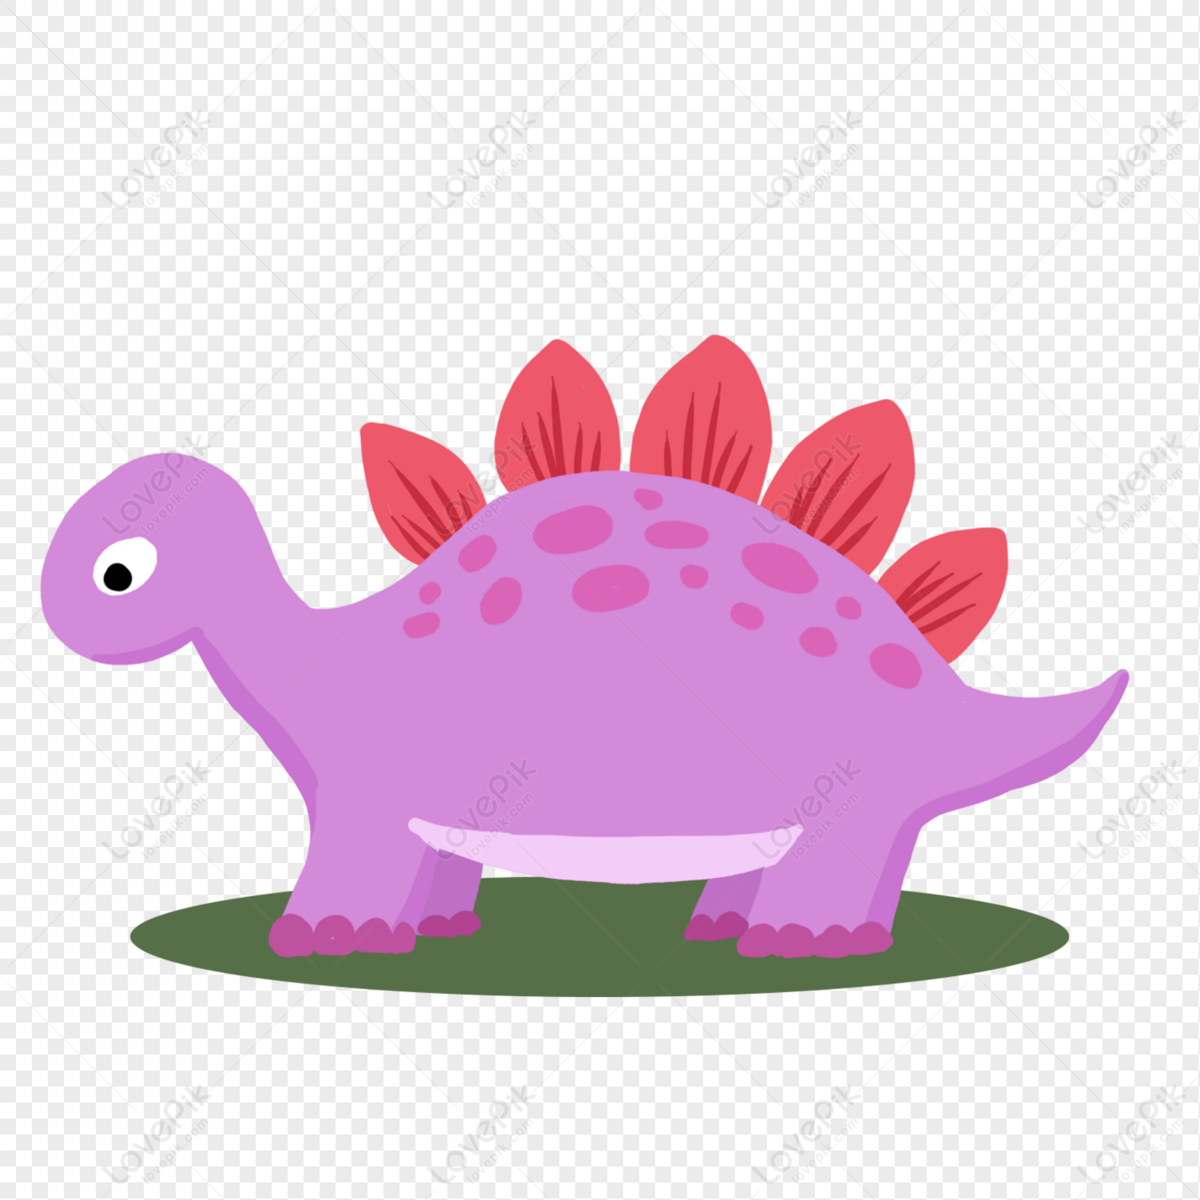 Cartoon Dinosaur Cute Animal Dinosa Free PNG And Clipart Image For Free  Download - Lovepik | 401563159